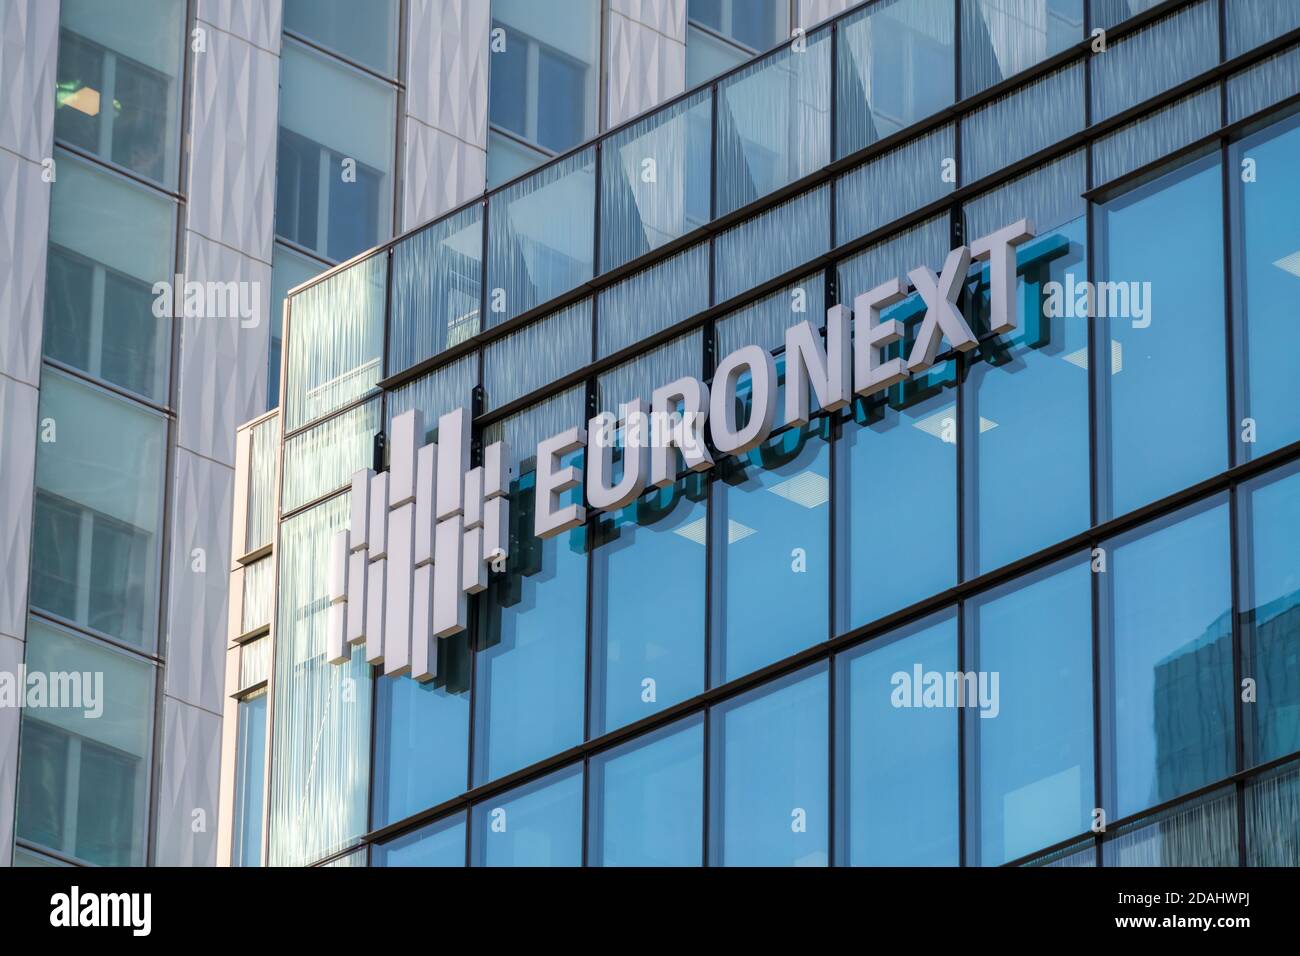 Courbevoie, France - November 12, 2020: Exterior view of the Euronext building in the business district of Paris La Défense Stock Photo